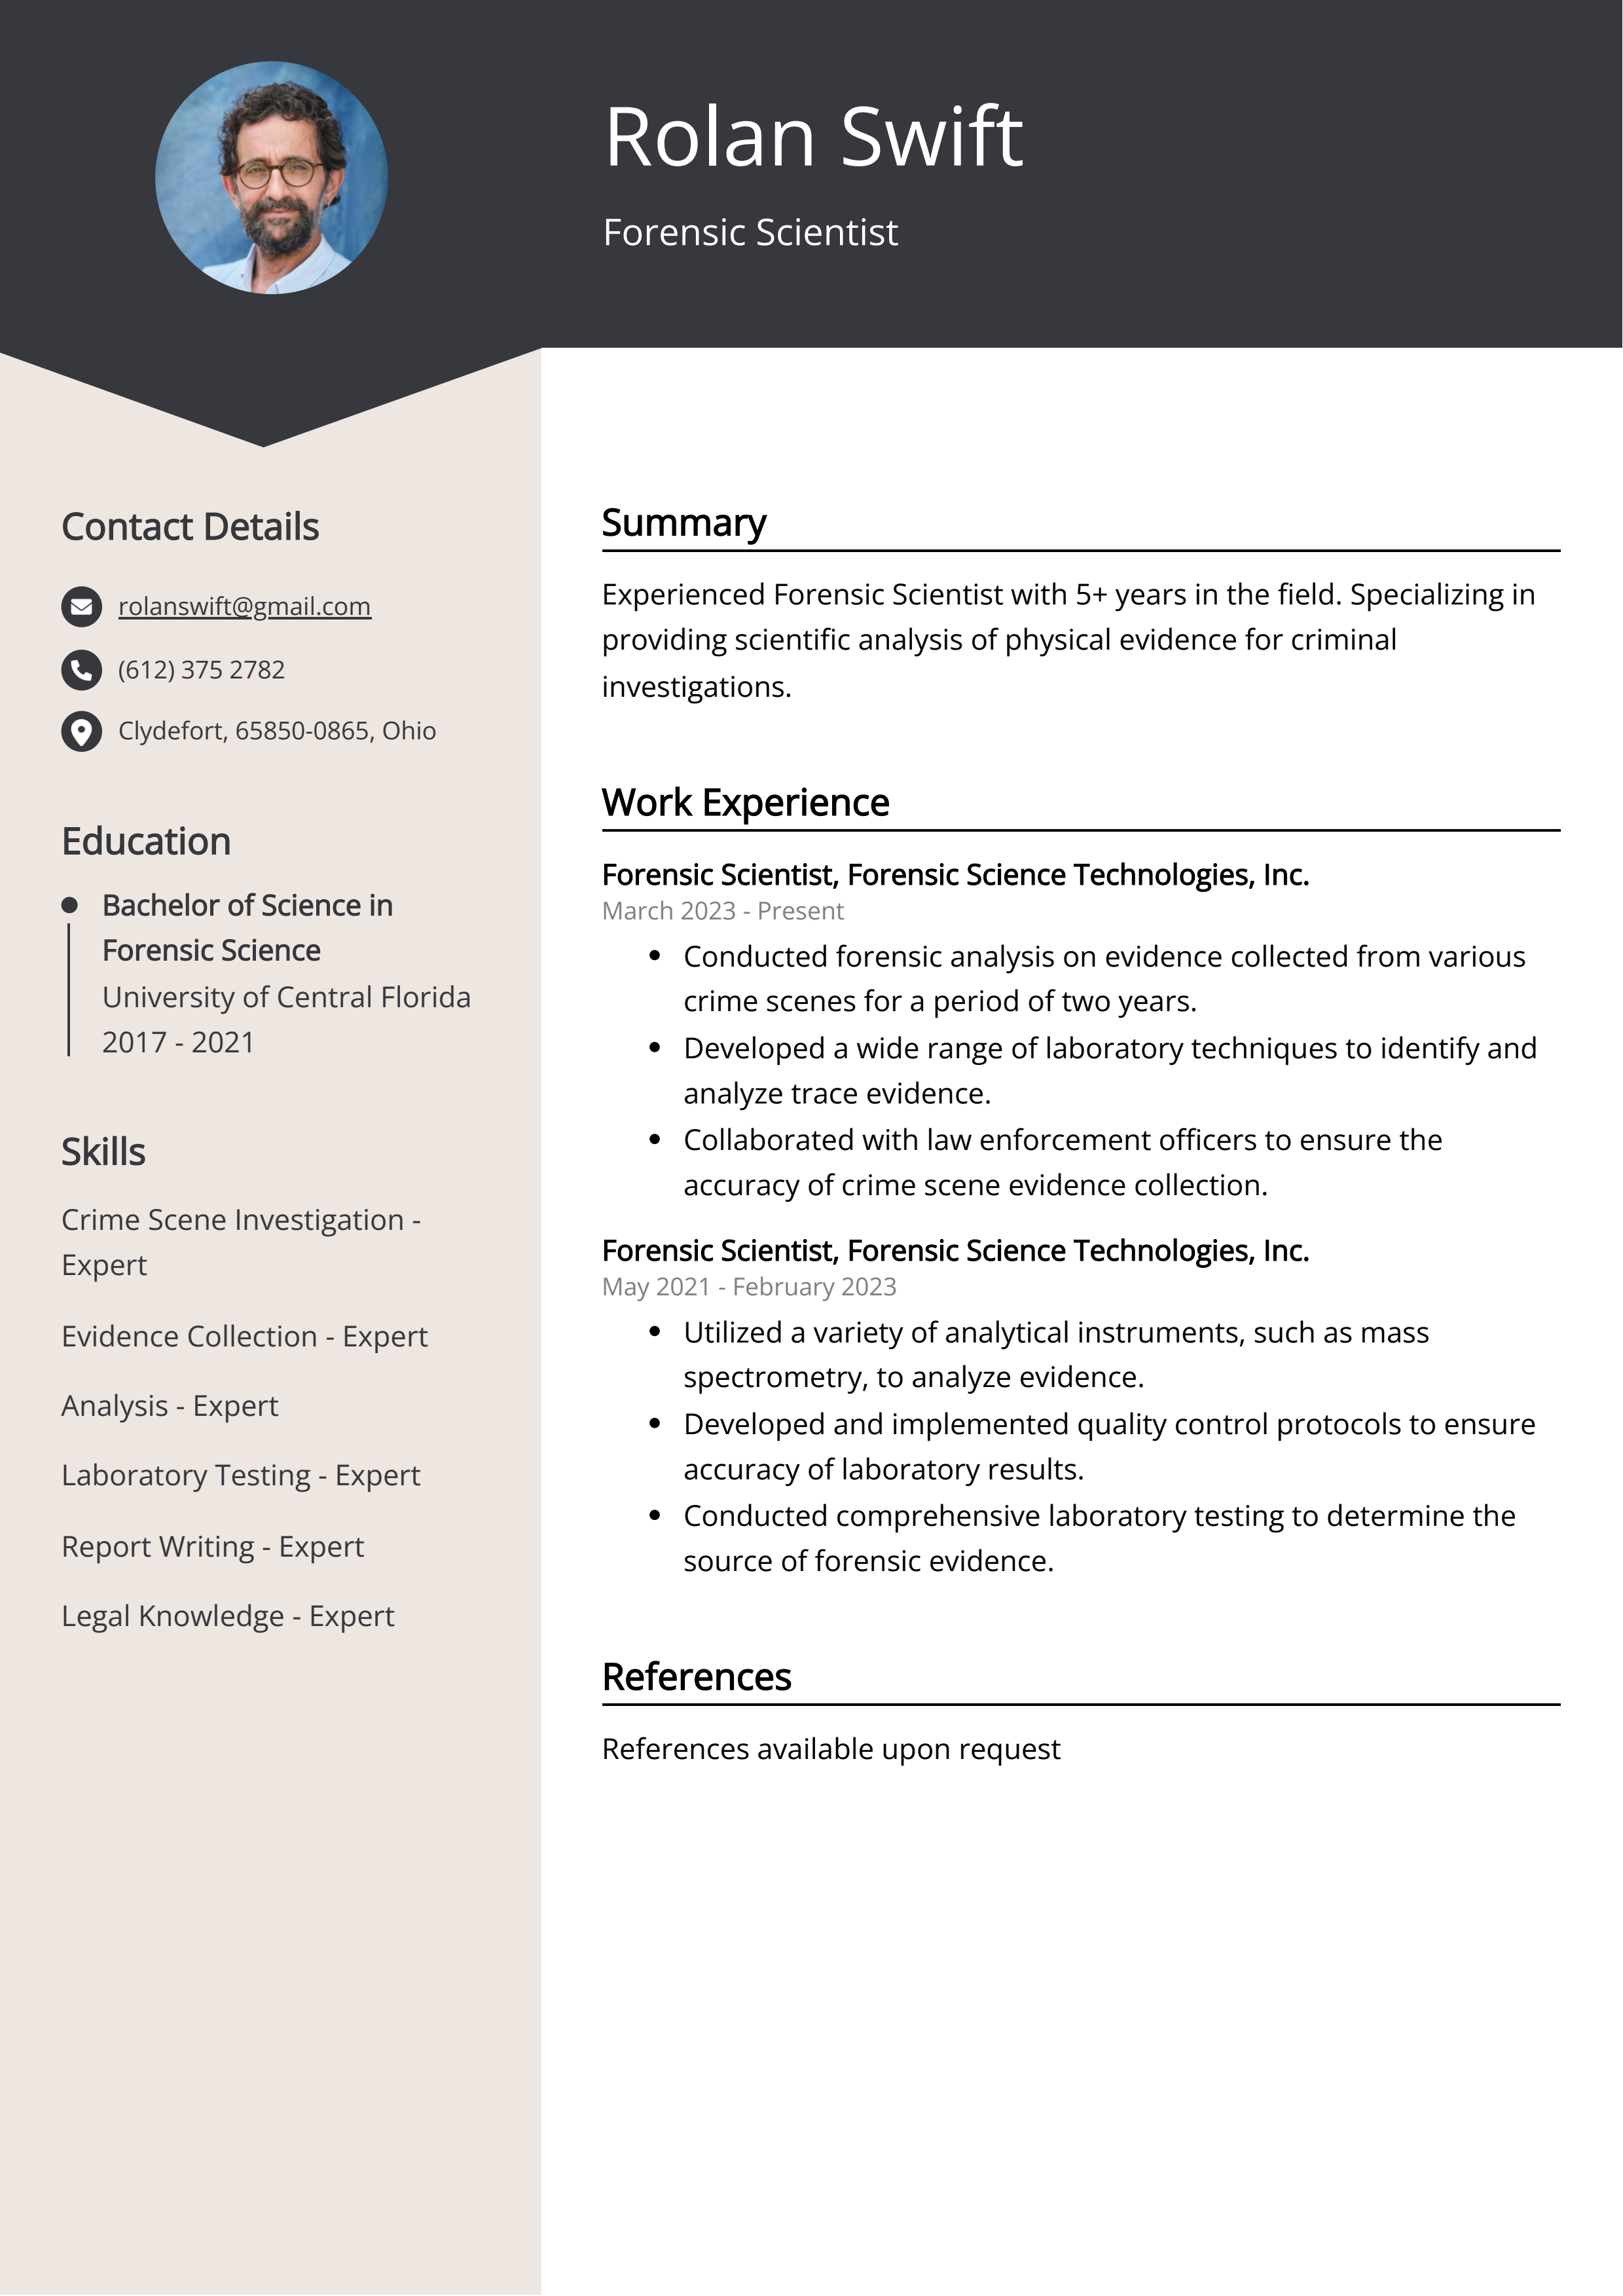 Forensic Scientist CV Example